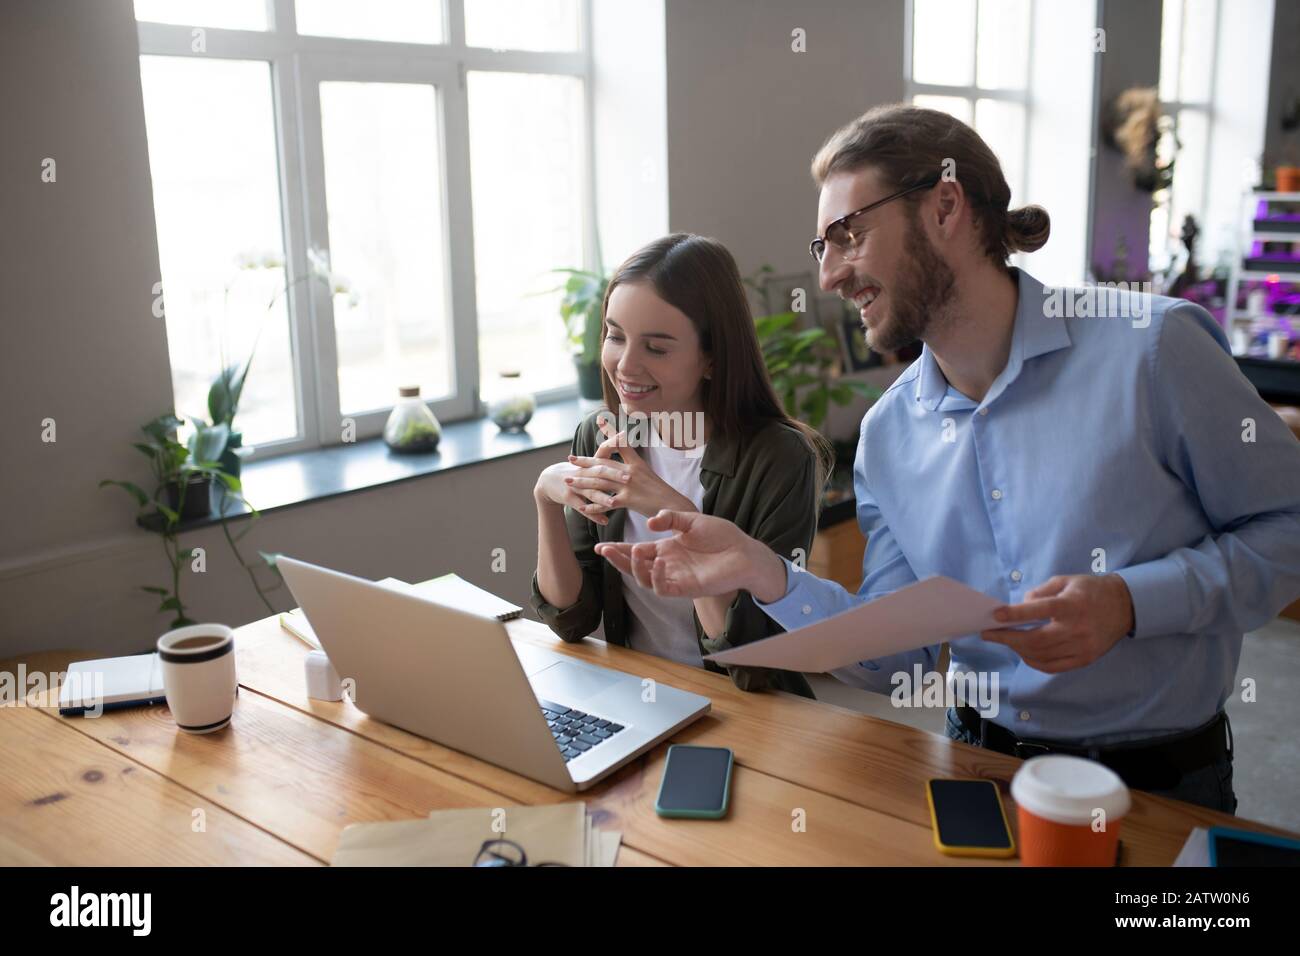 Business partners. Man with glasses and light blue shirt and girl with long dark hair working at a laptop in the office, smiling and joyful in good mo Stock Photo